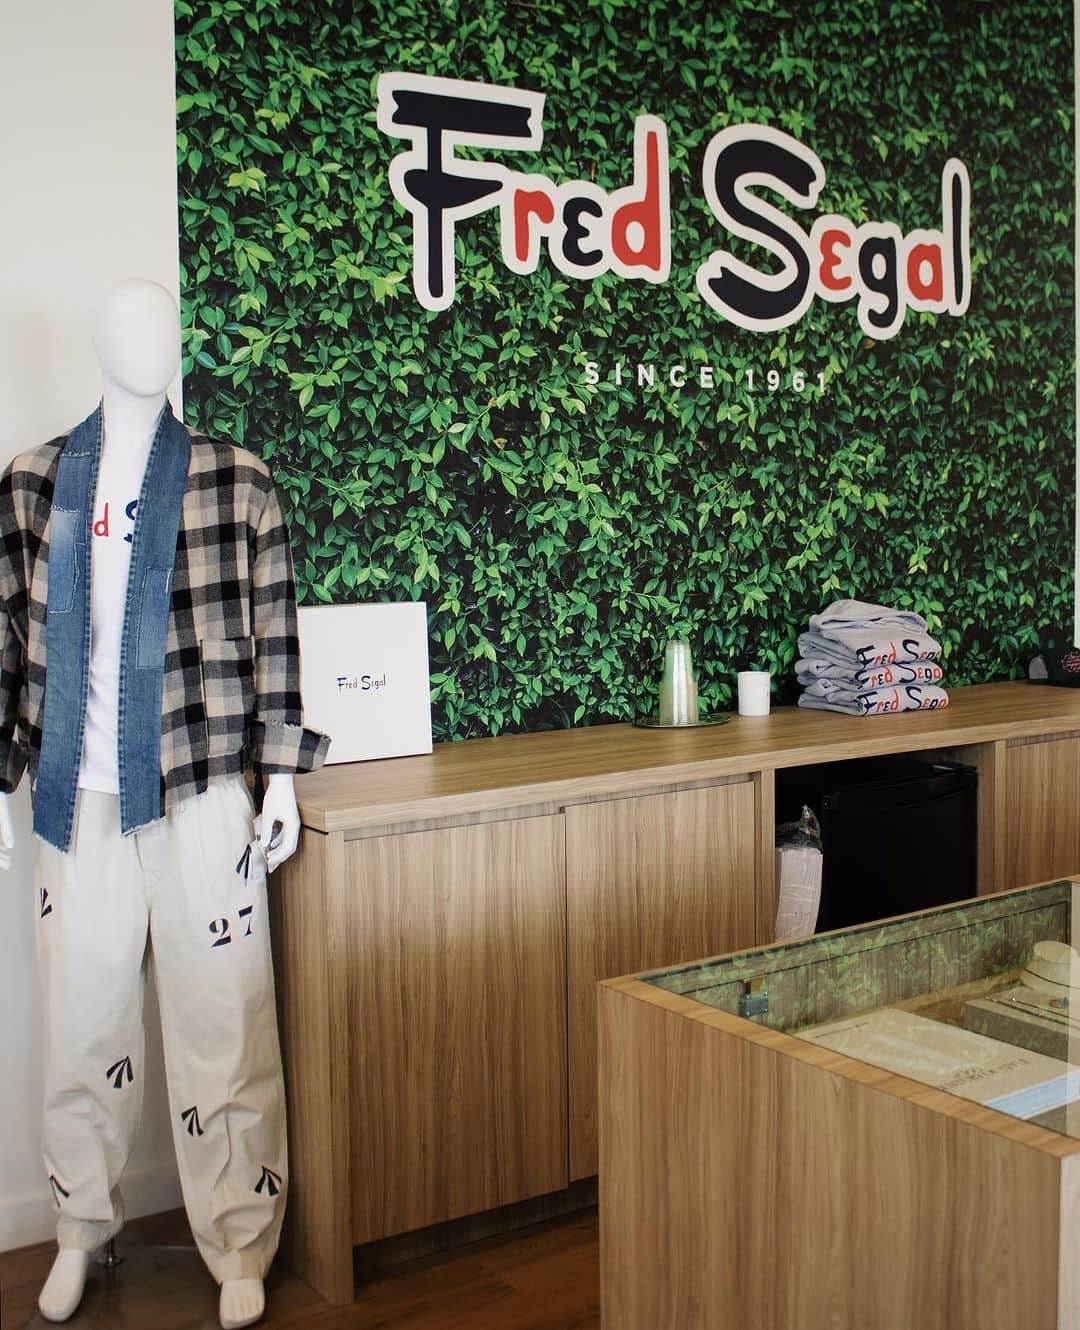 Fred Segalのインスタグラム：「Fred Segal ❤️ Santa Monica.  Visit our newest location, 1533 Montana Avenue.」